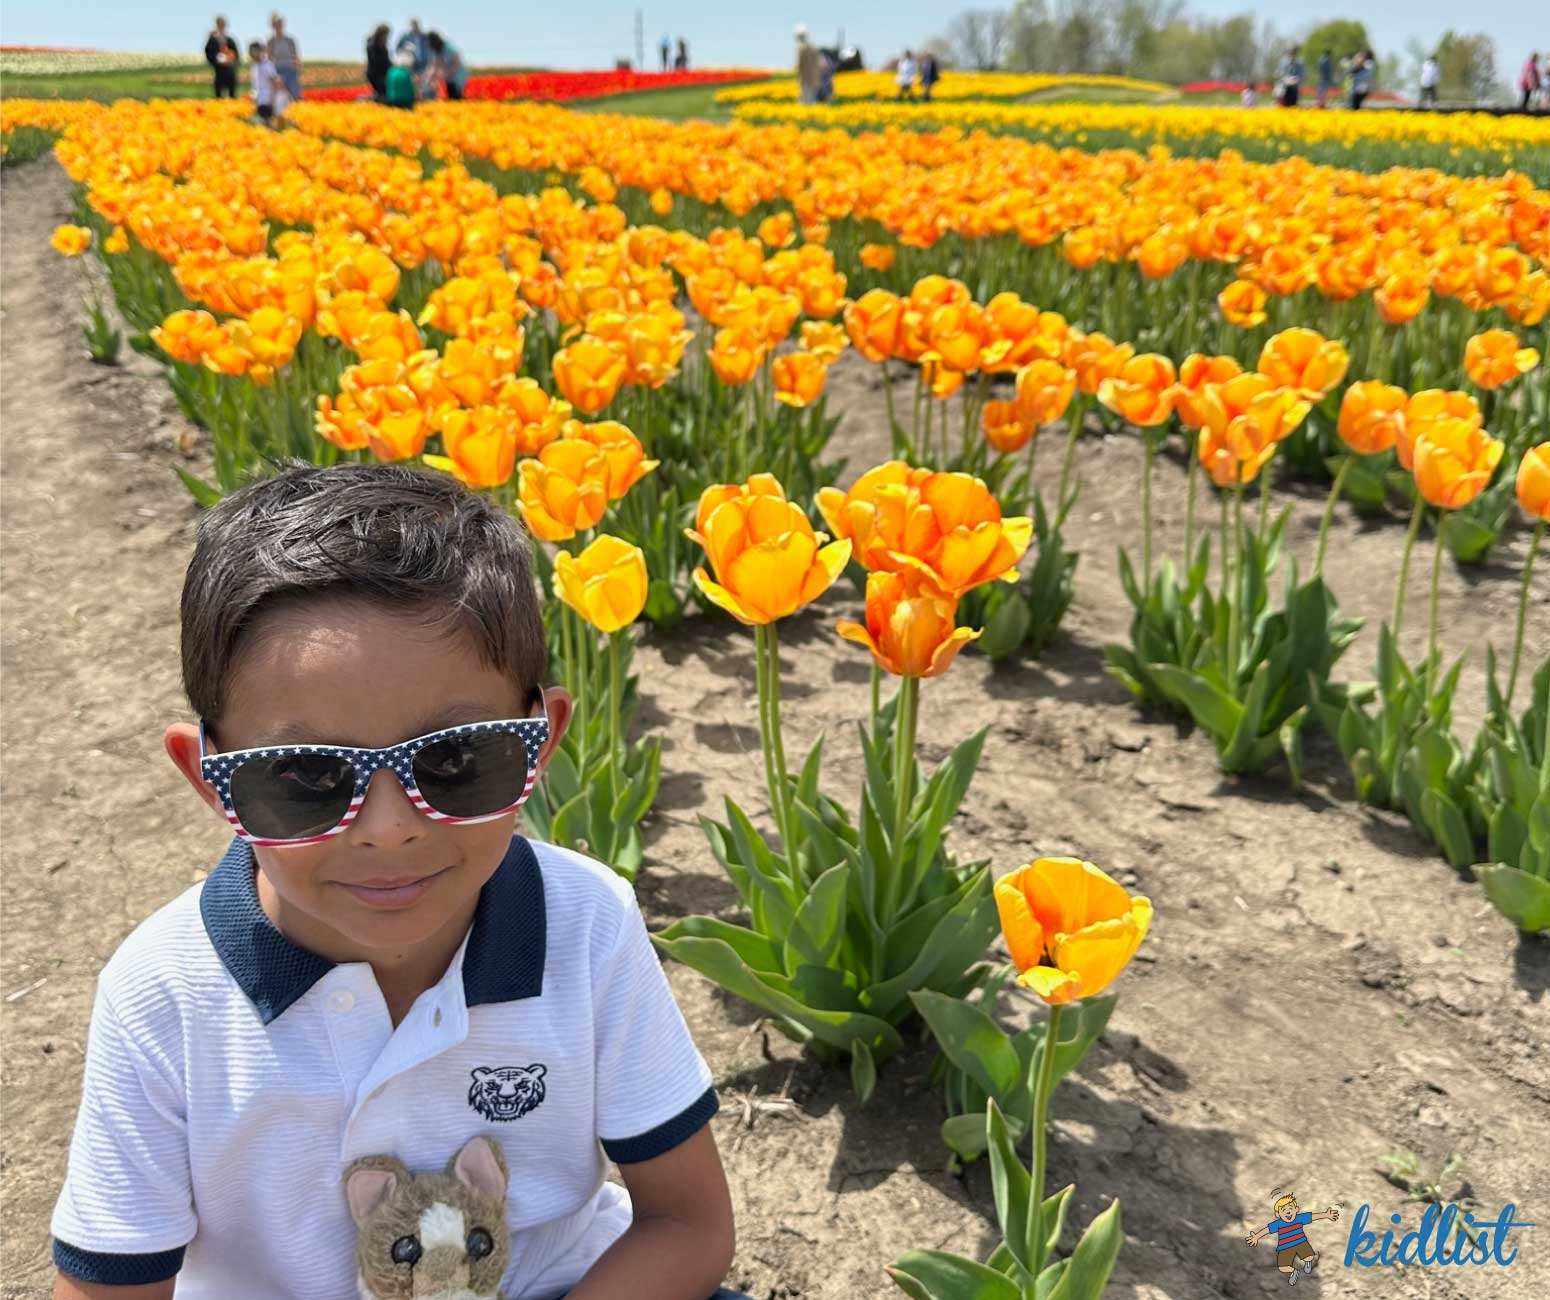 A child with sunglasses holding a stuffed animal stands smiling in a field of tulips.